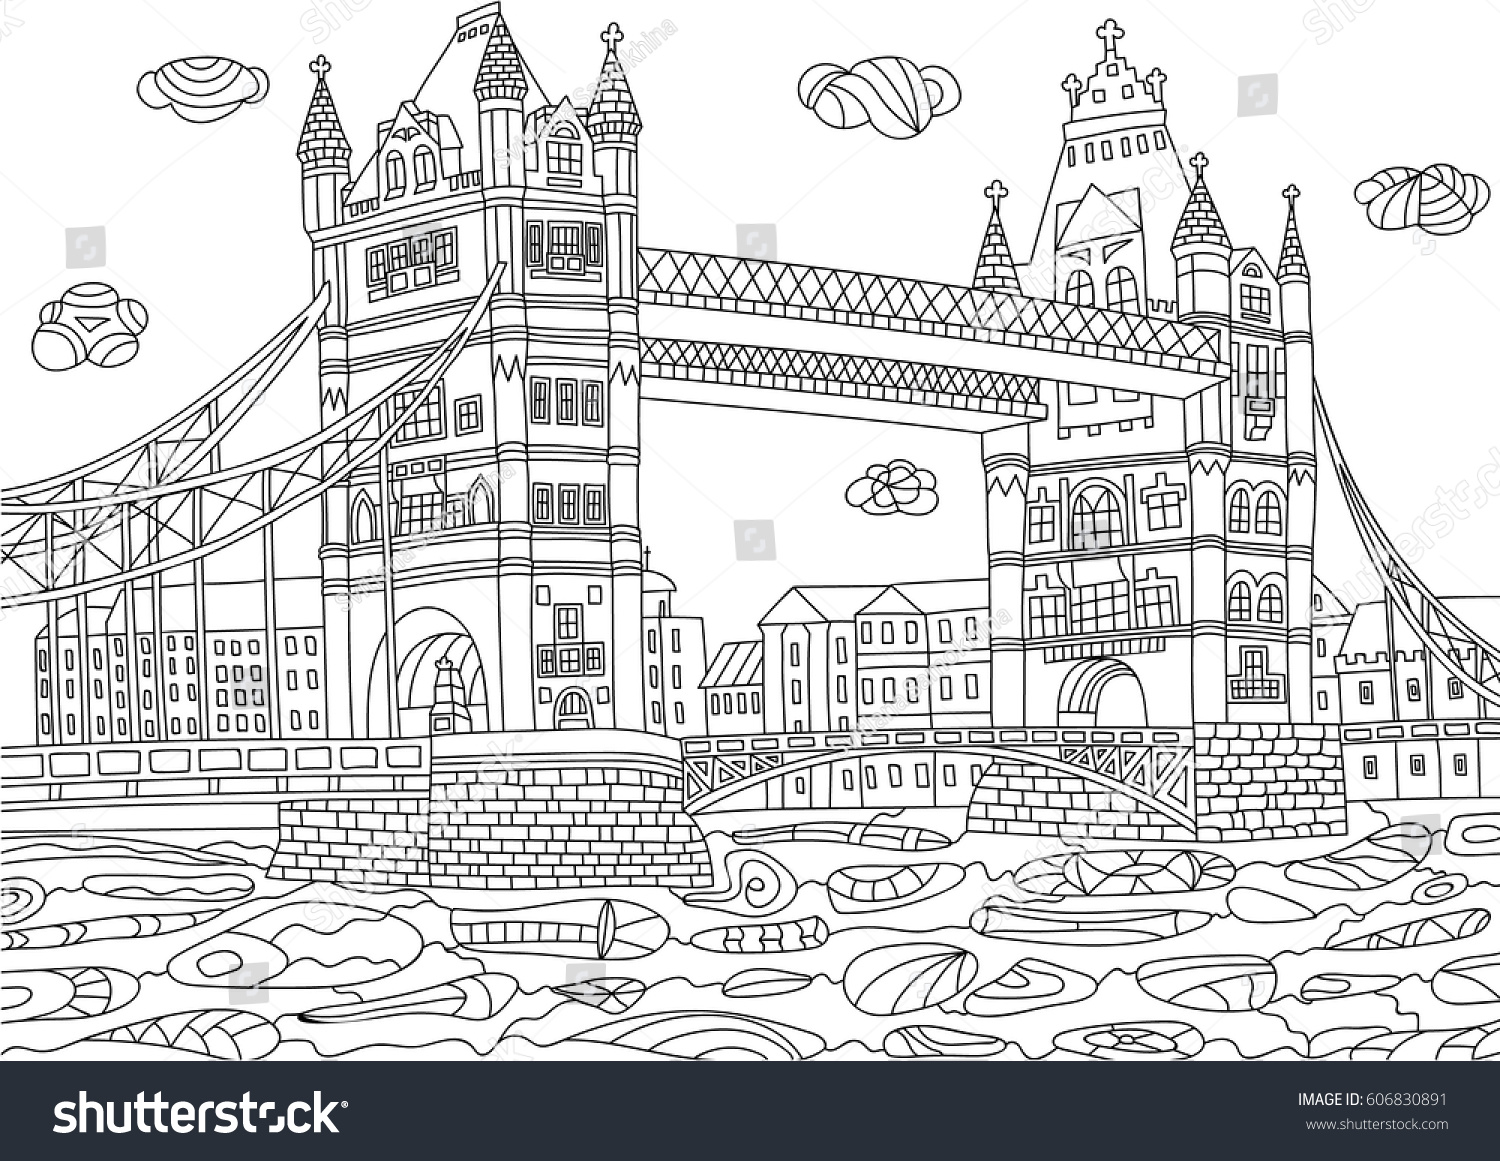 Download Coloring Adult London Great Britain Coloring Stock Vector Royalty Free 606830891